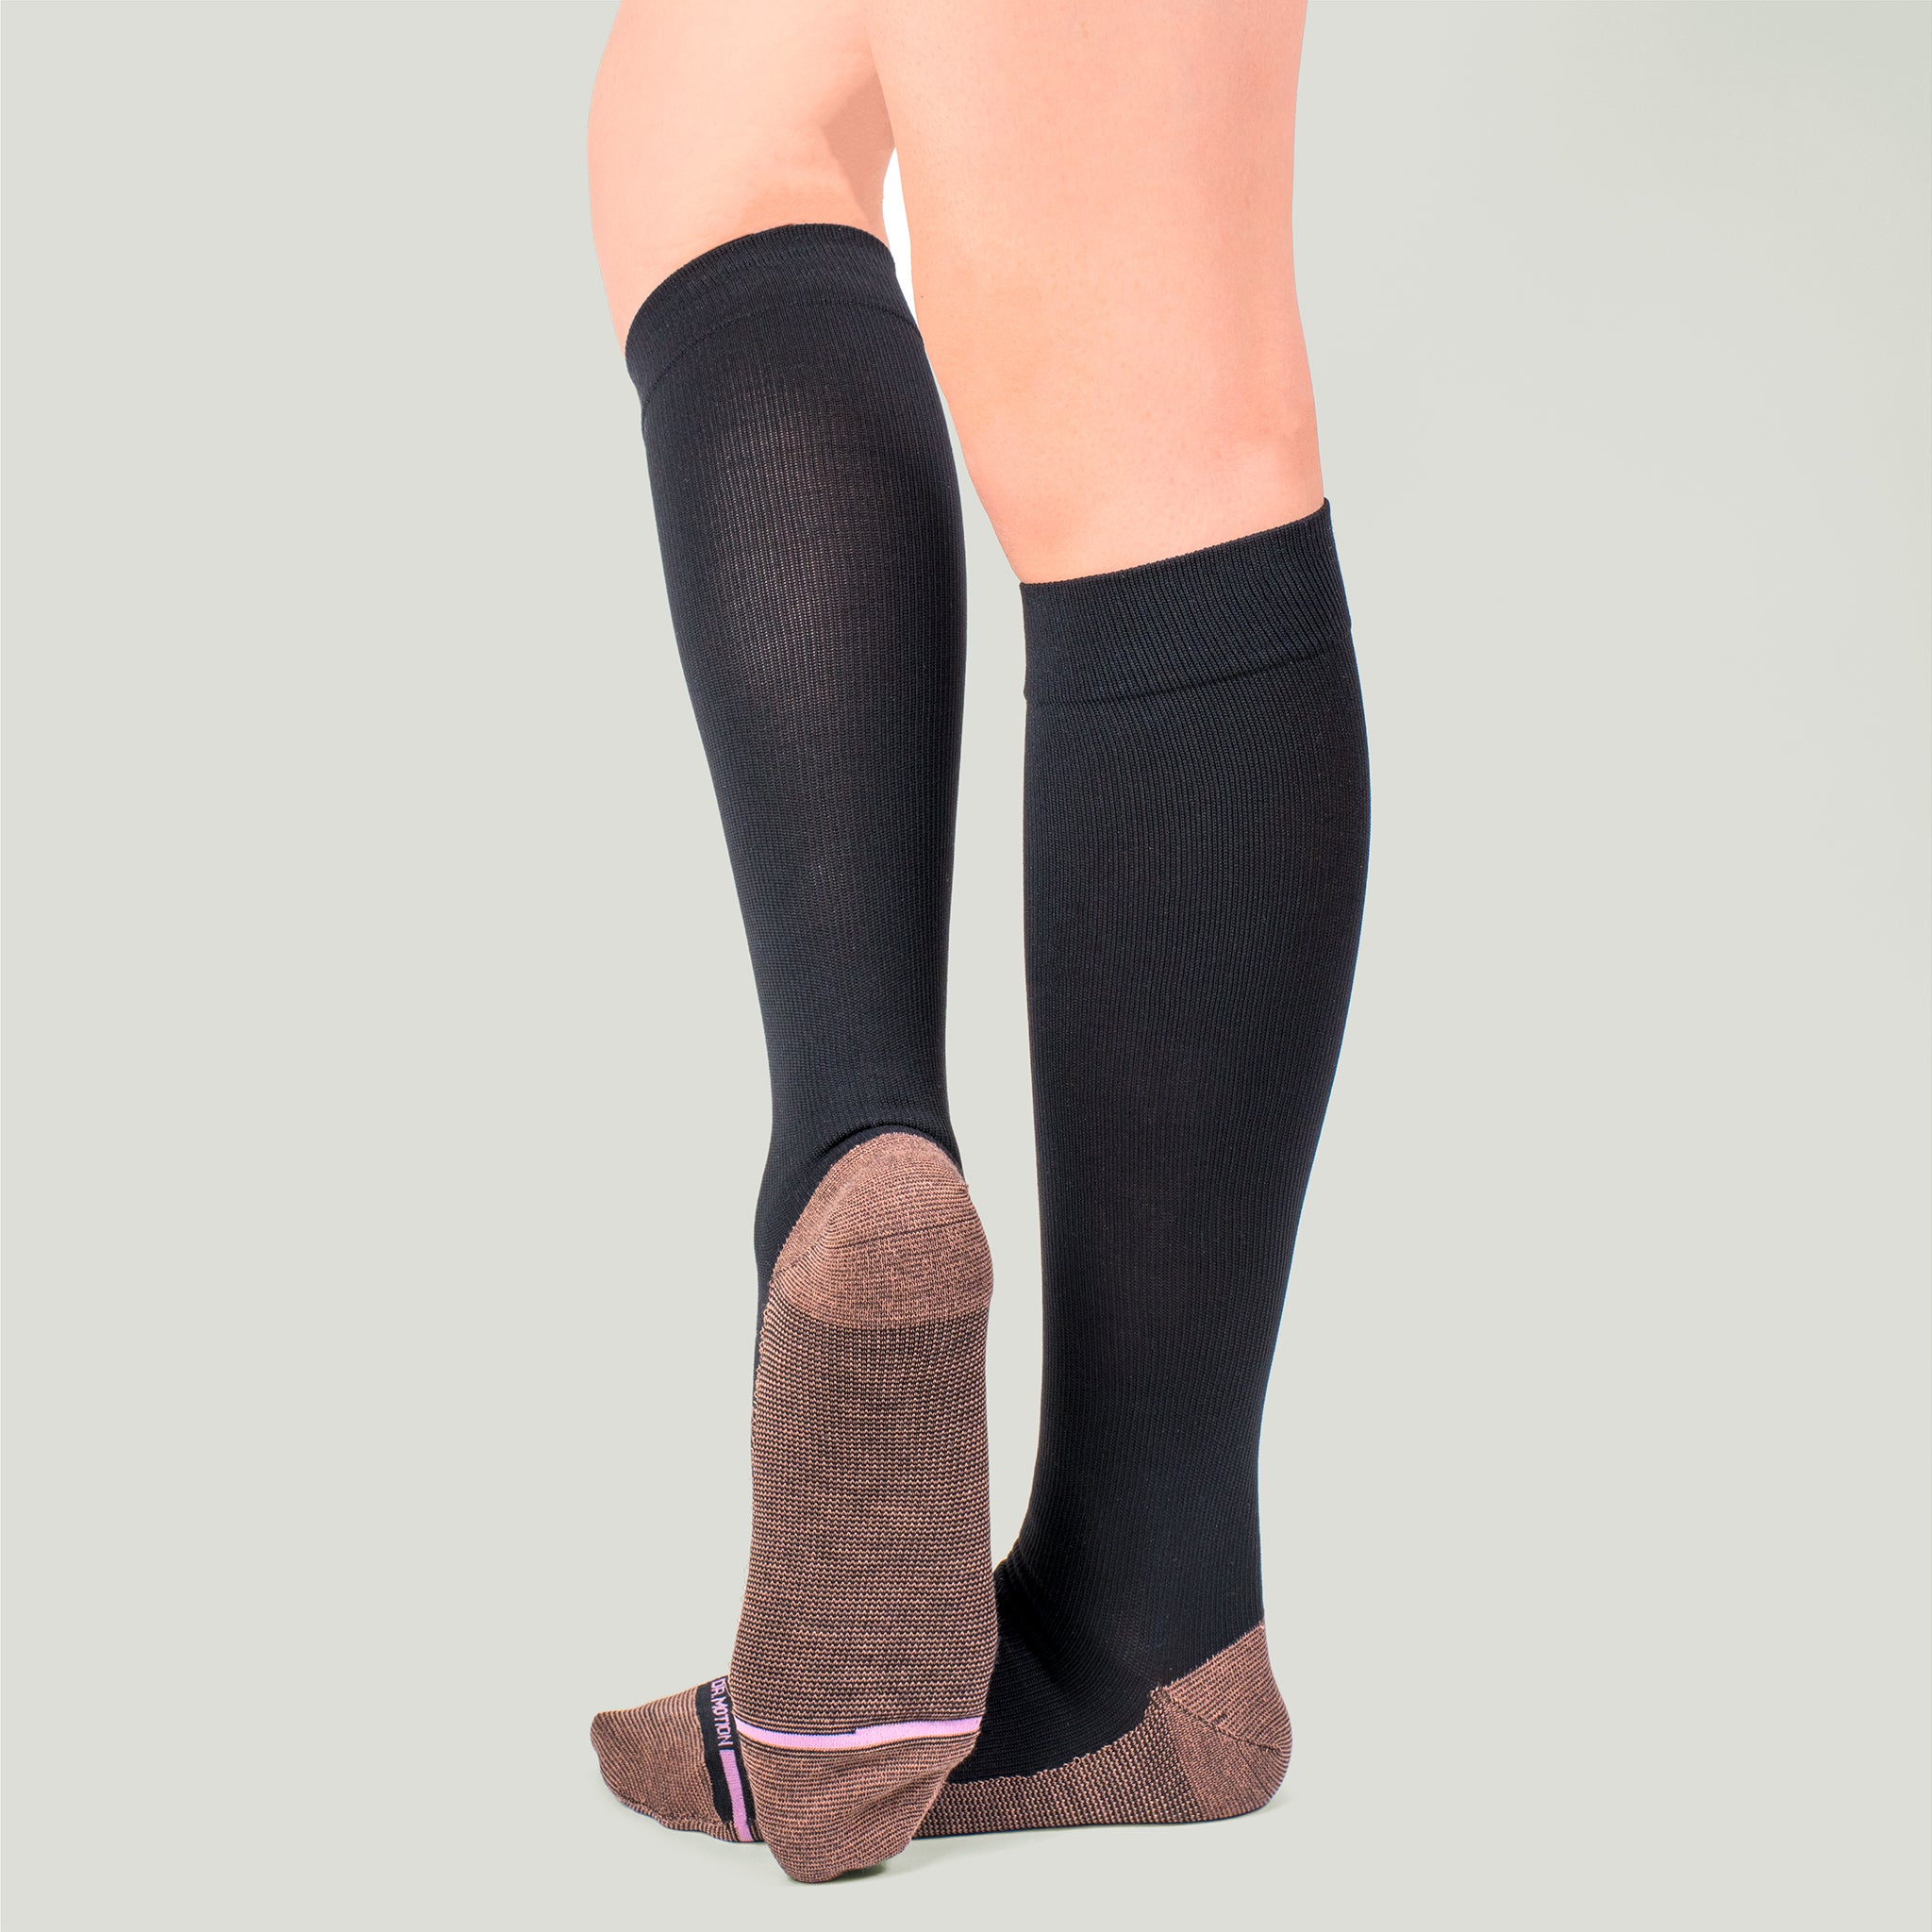 The most popular misconceptions on compression socks